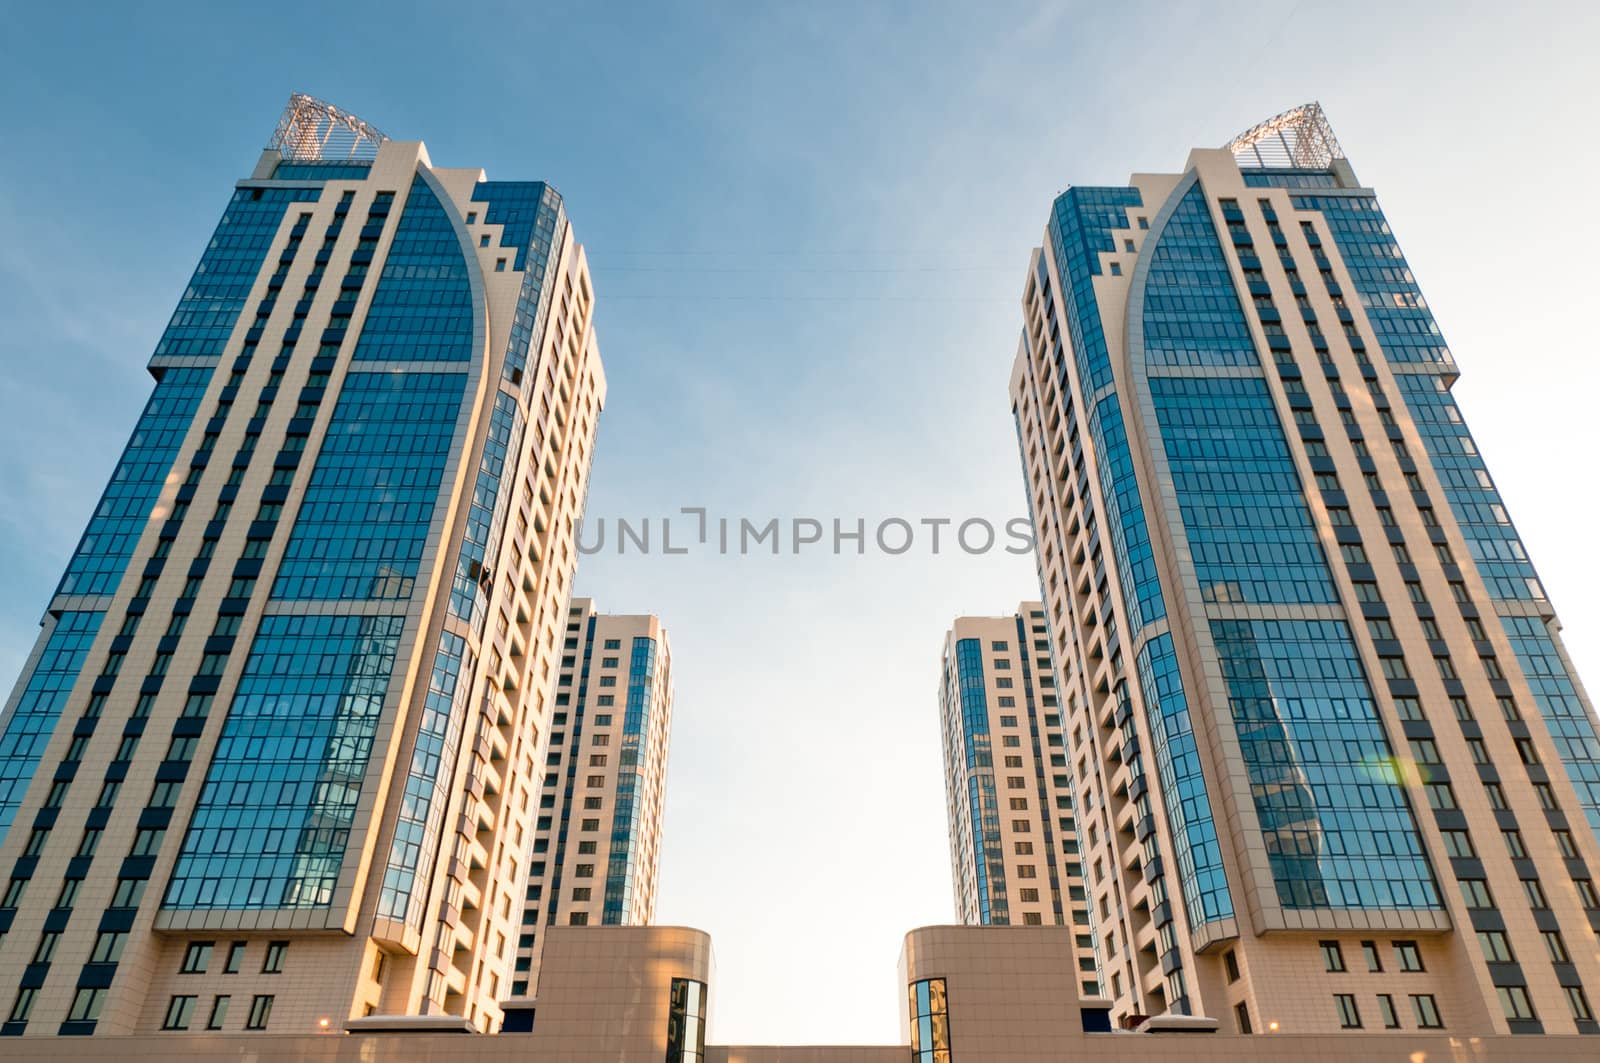 Symmetrical new house and offices towers at sunrise